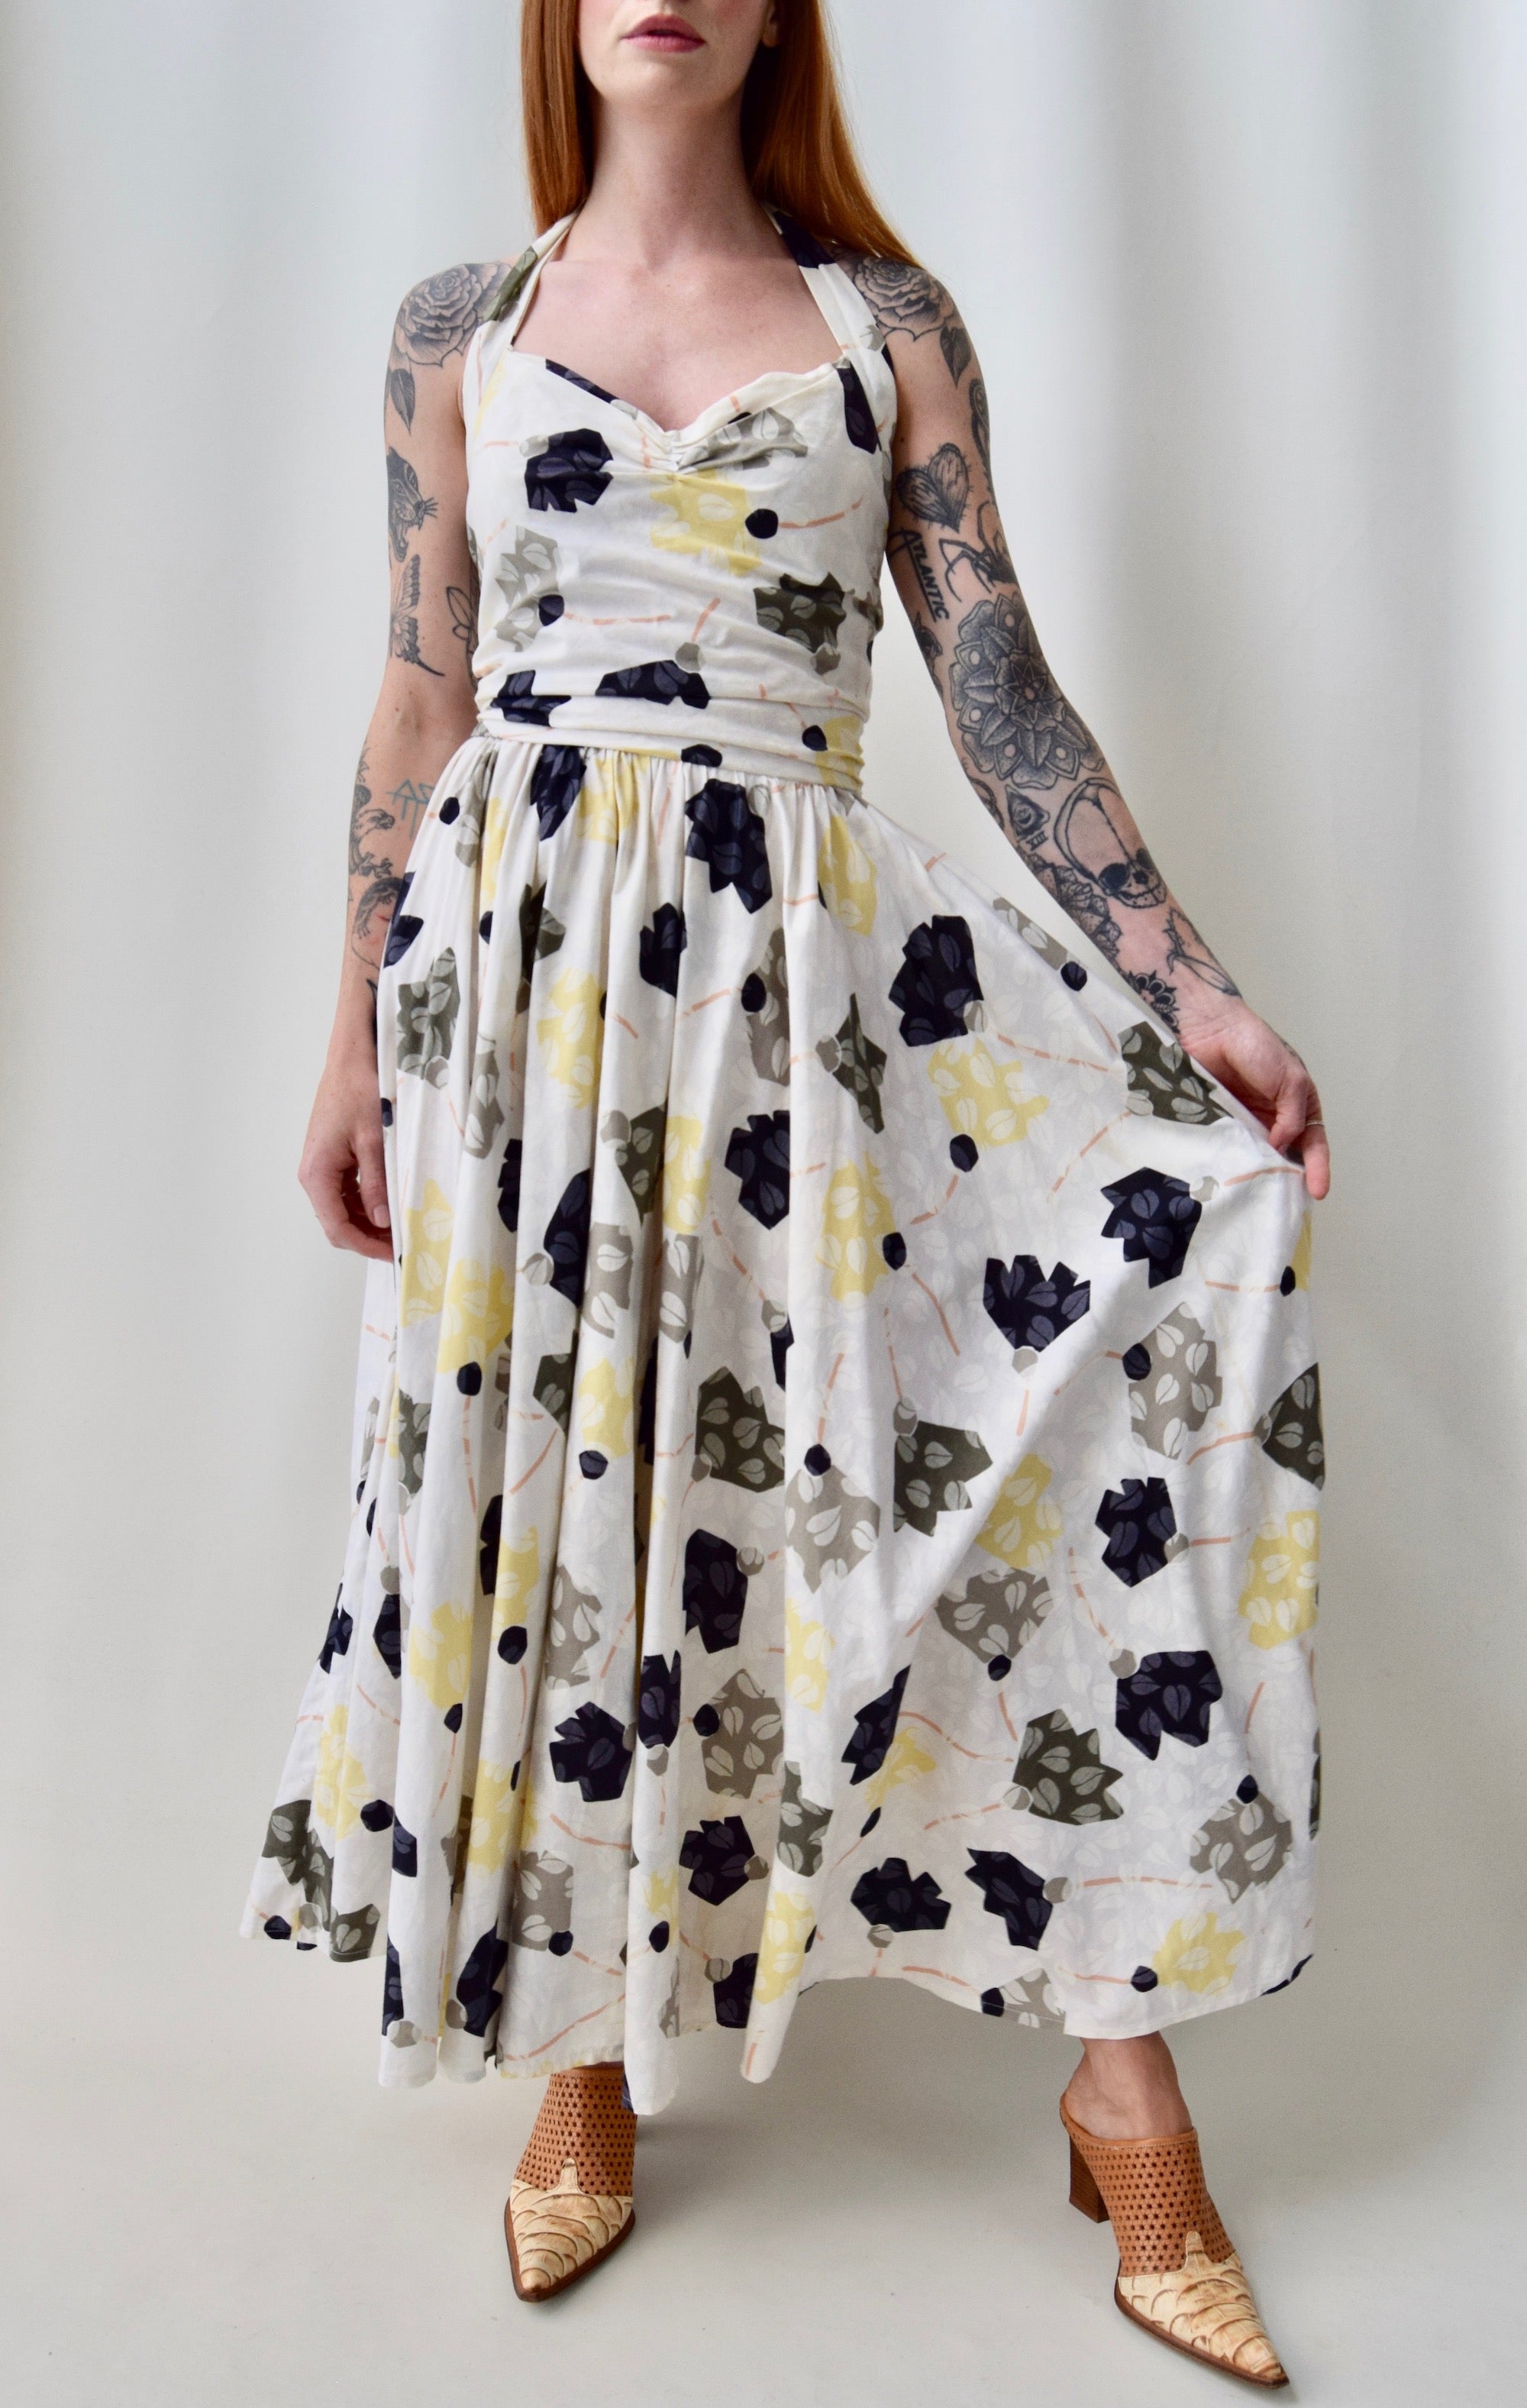 "The Very Thing!" Neutral Halter Dress